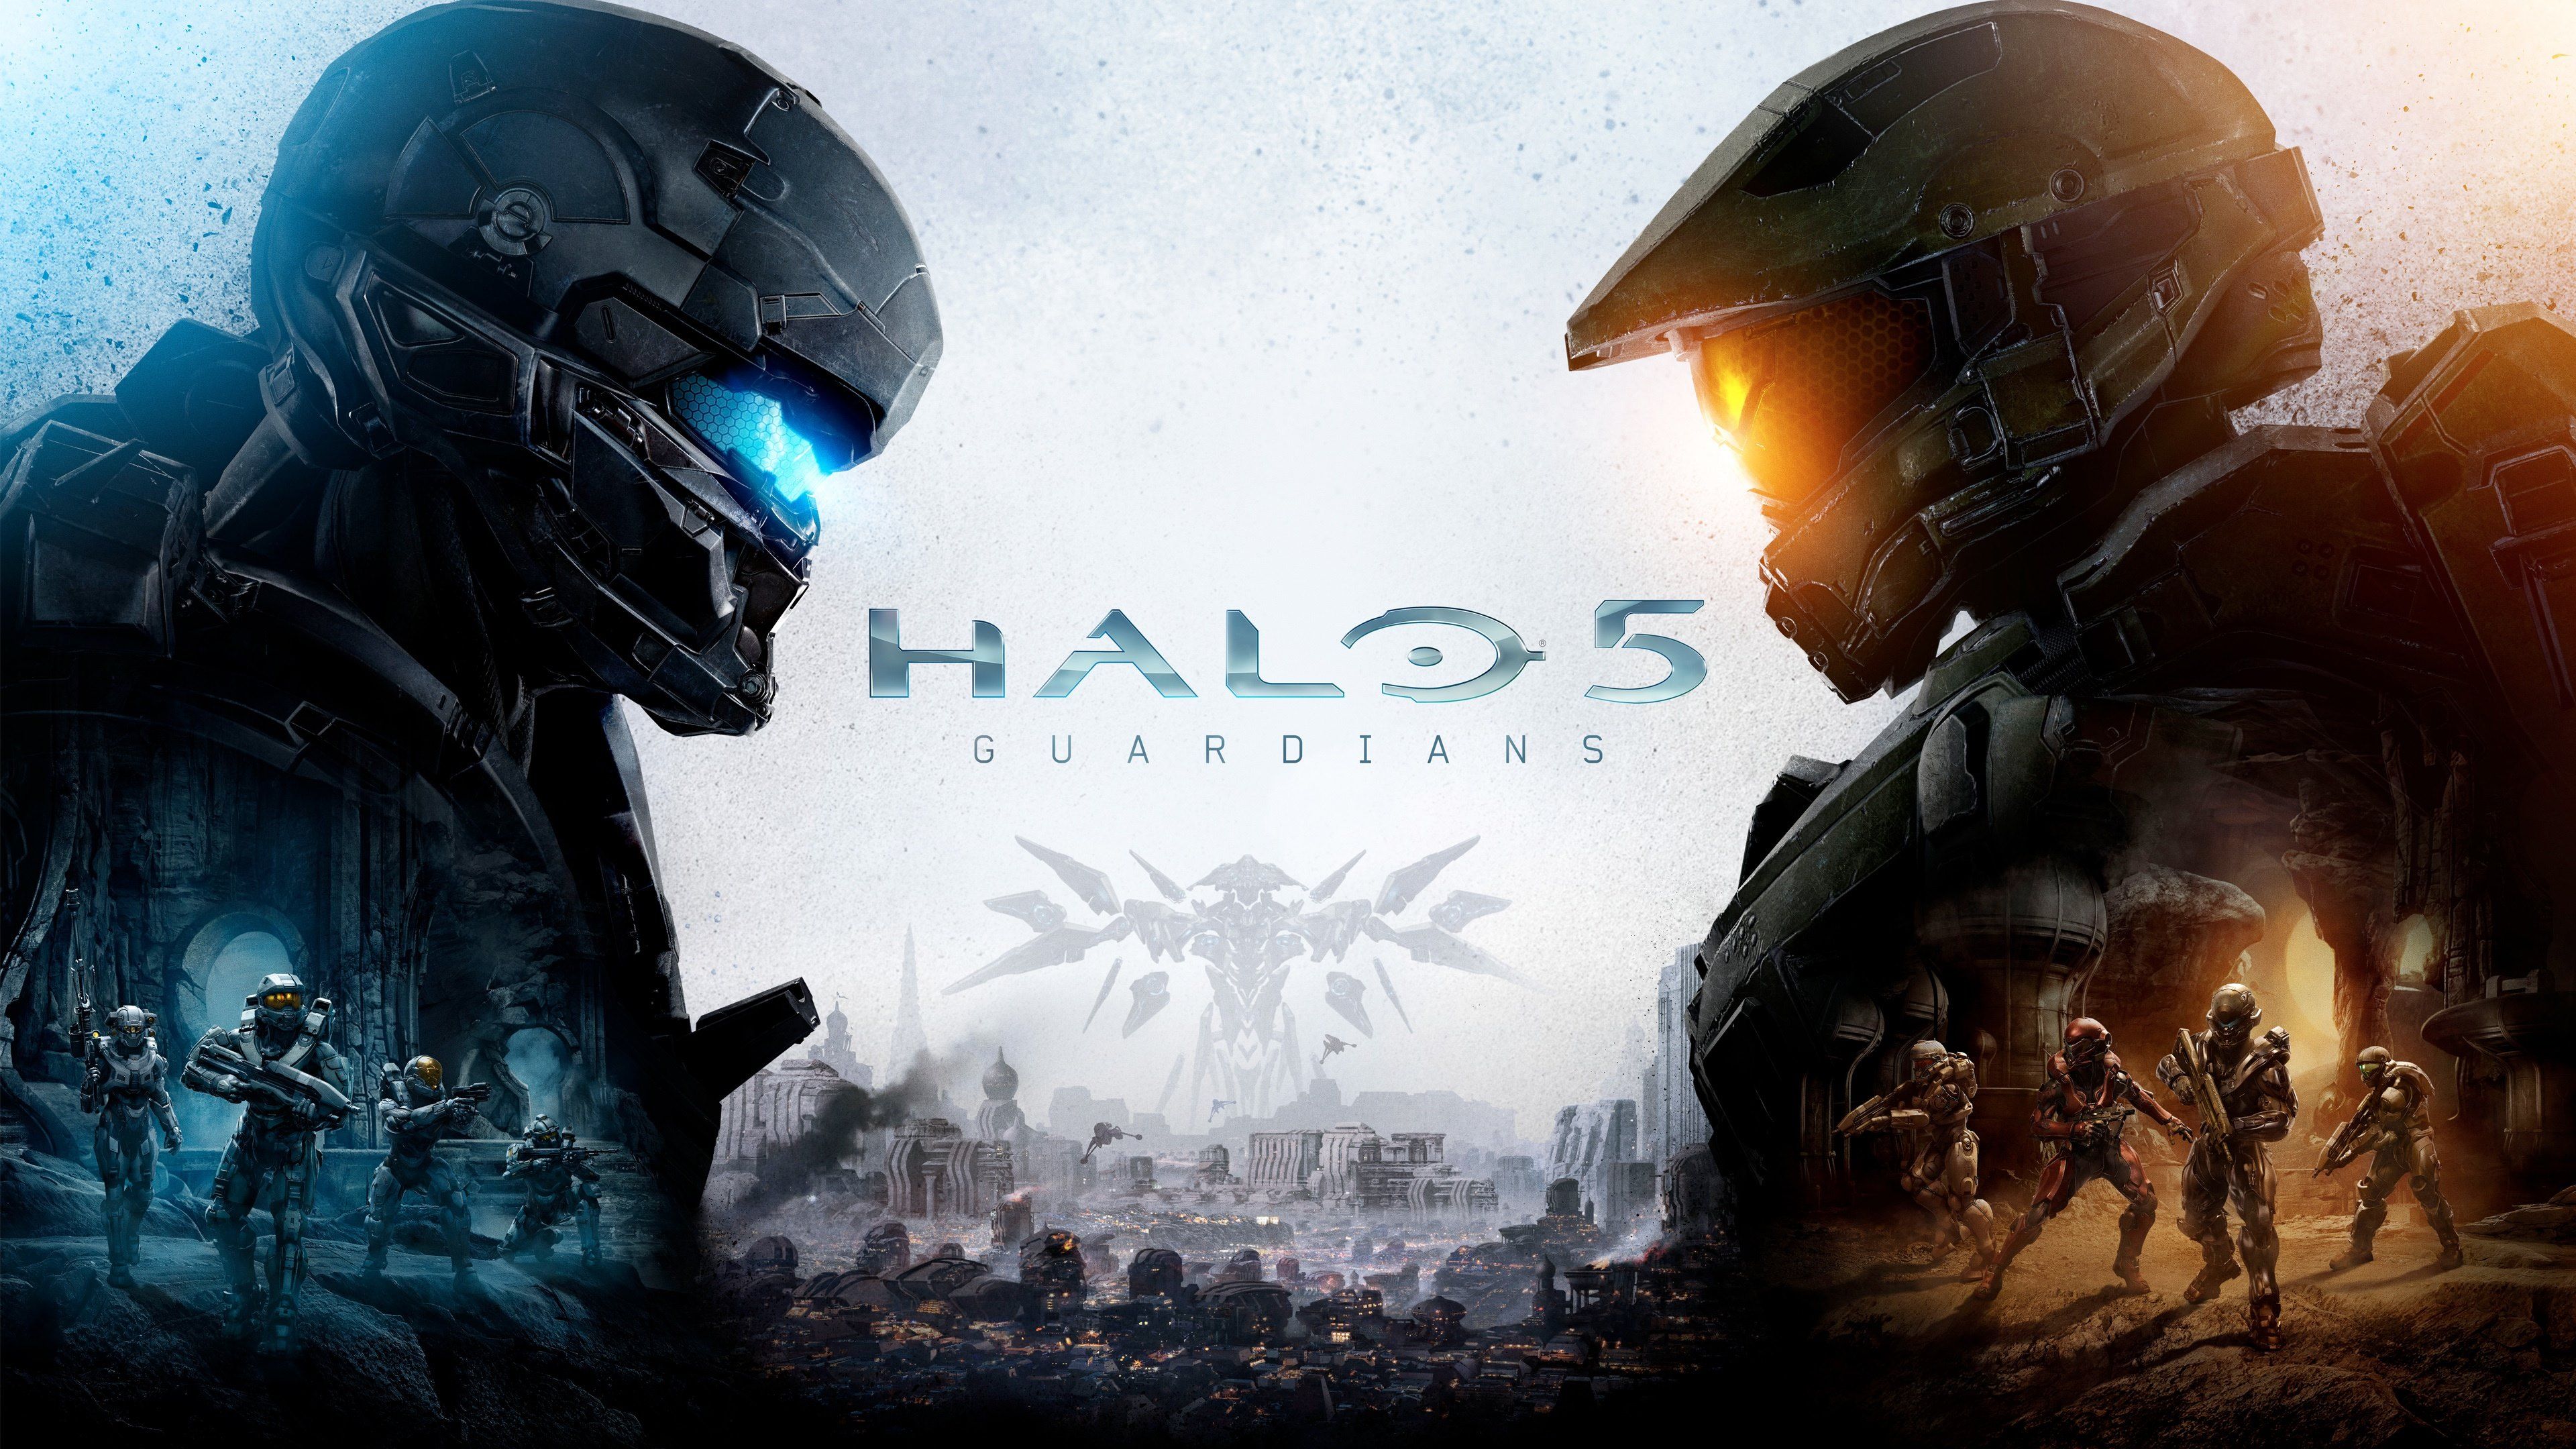 halo 5 guardians wallpaper,action adventure game,movie,poster,action film,strategy video game